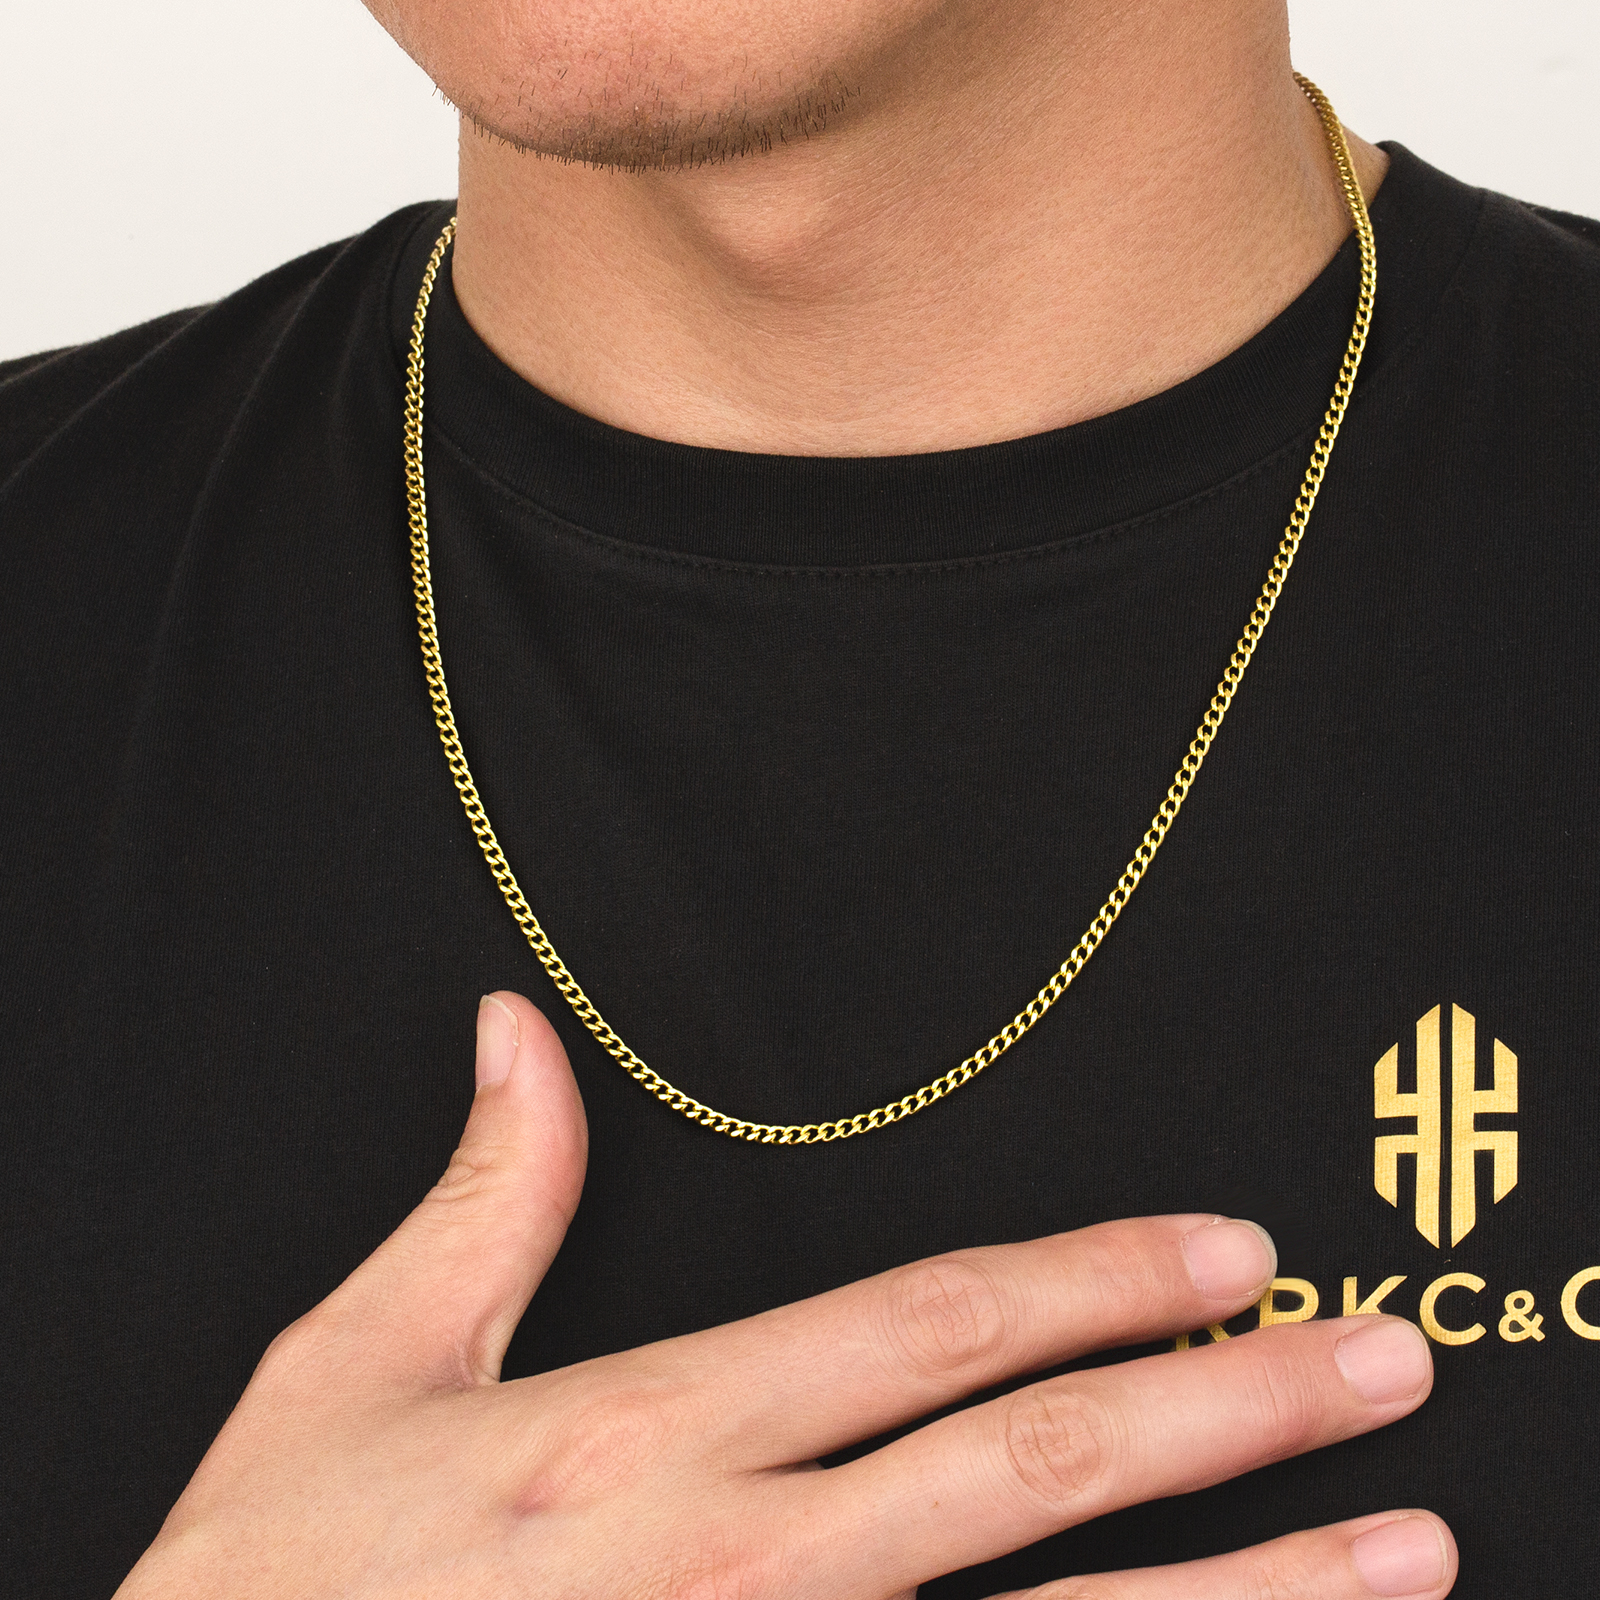 NEW】14k 喜平 ネックレス メンズ 幅3mm curb chain hiphop jewelry KRKC